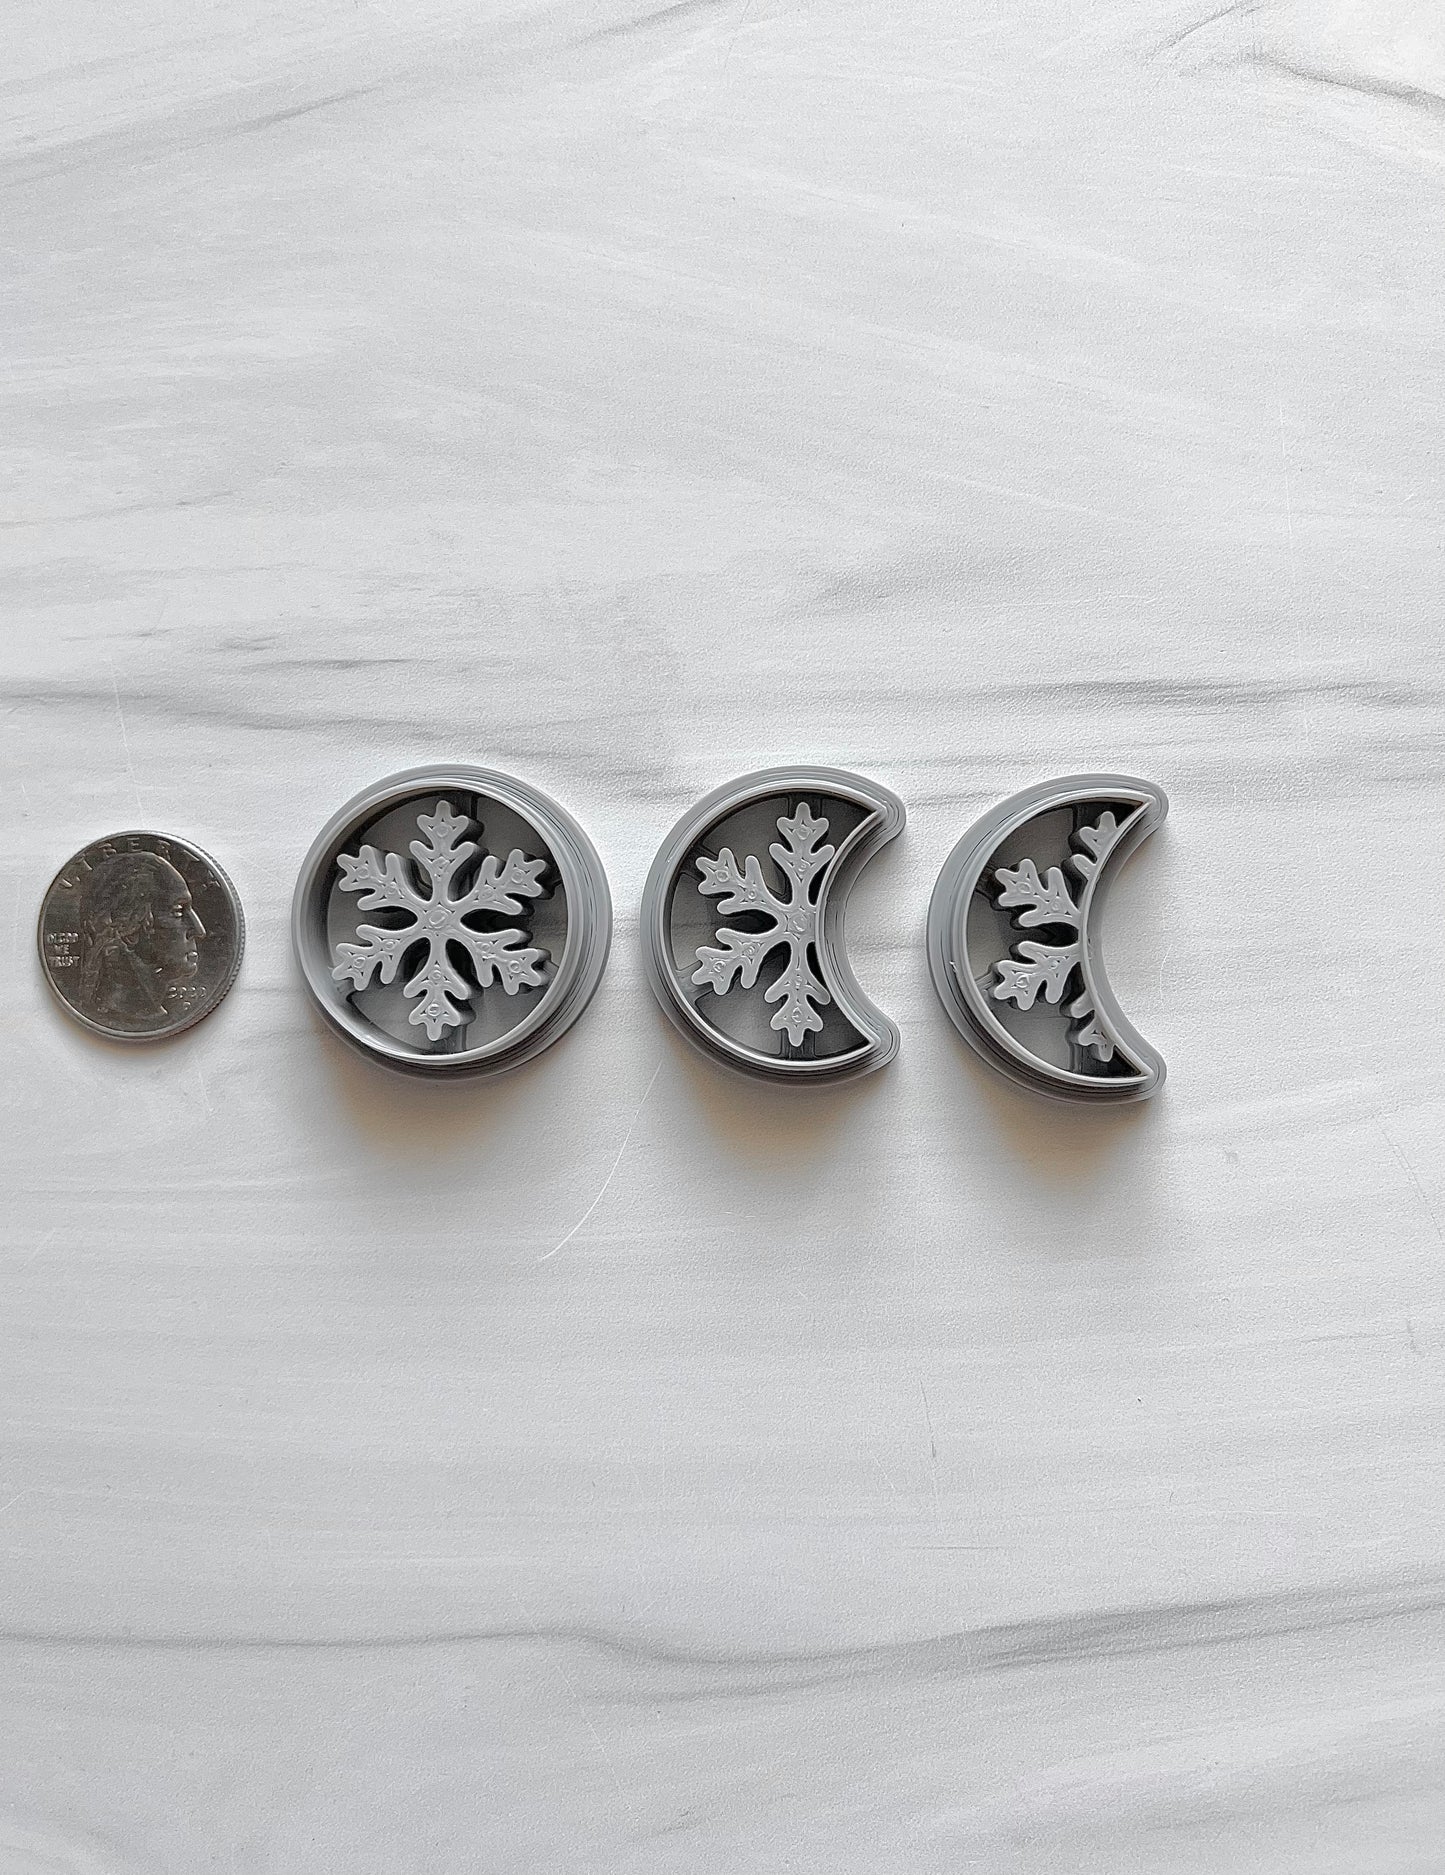 Snowflake Moon Phase Cutters (Set of 3)